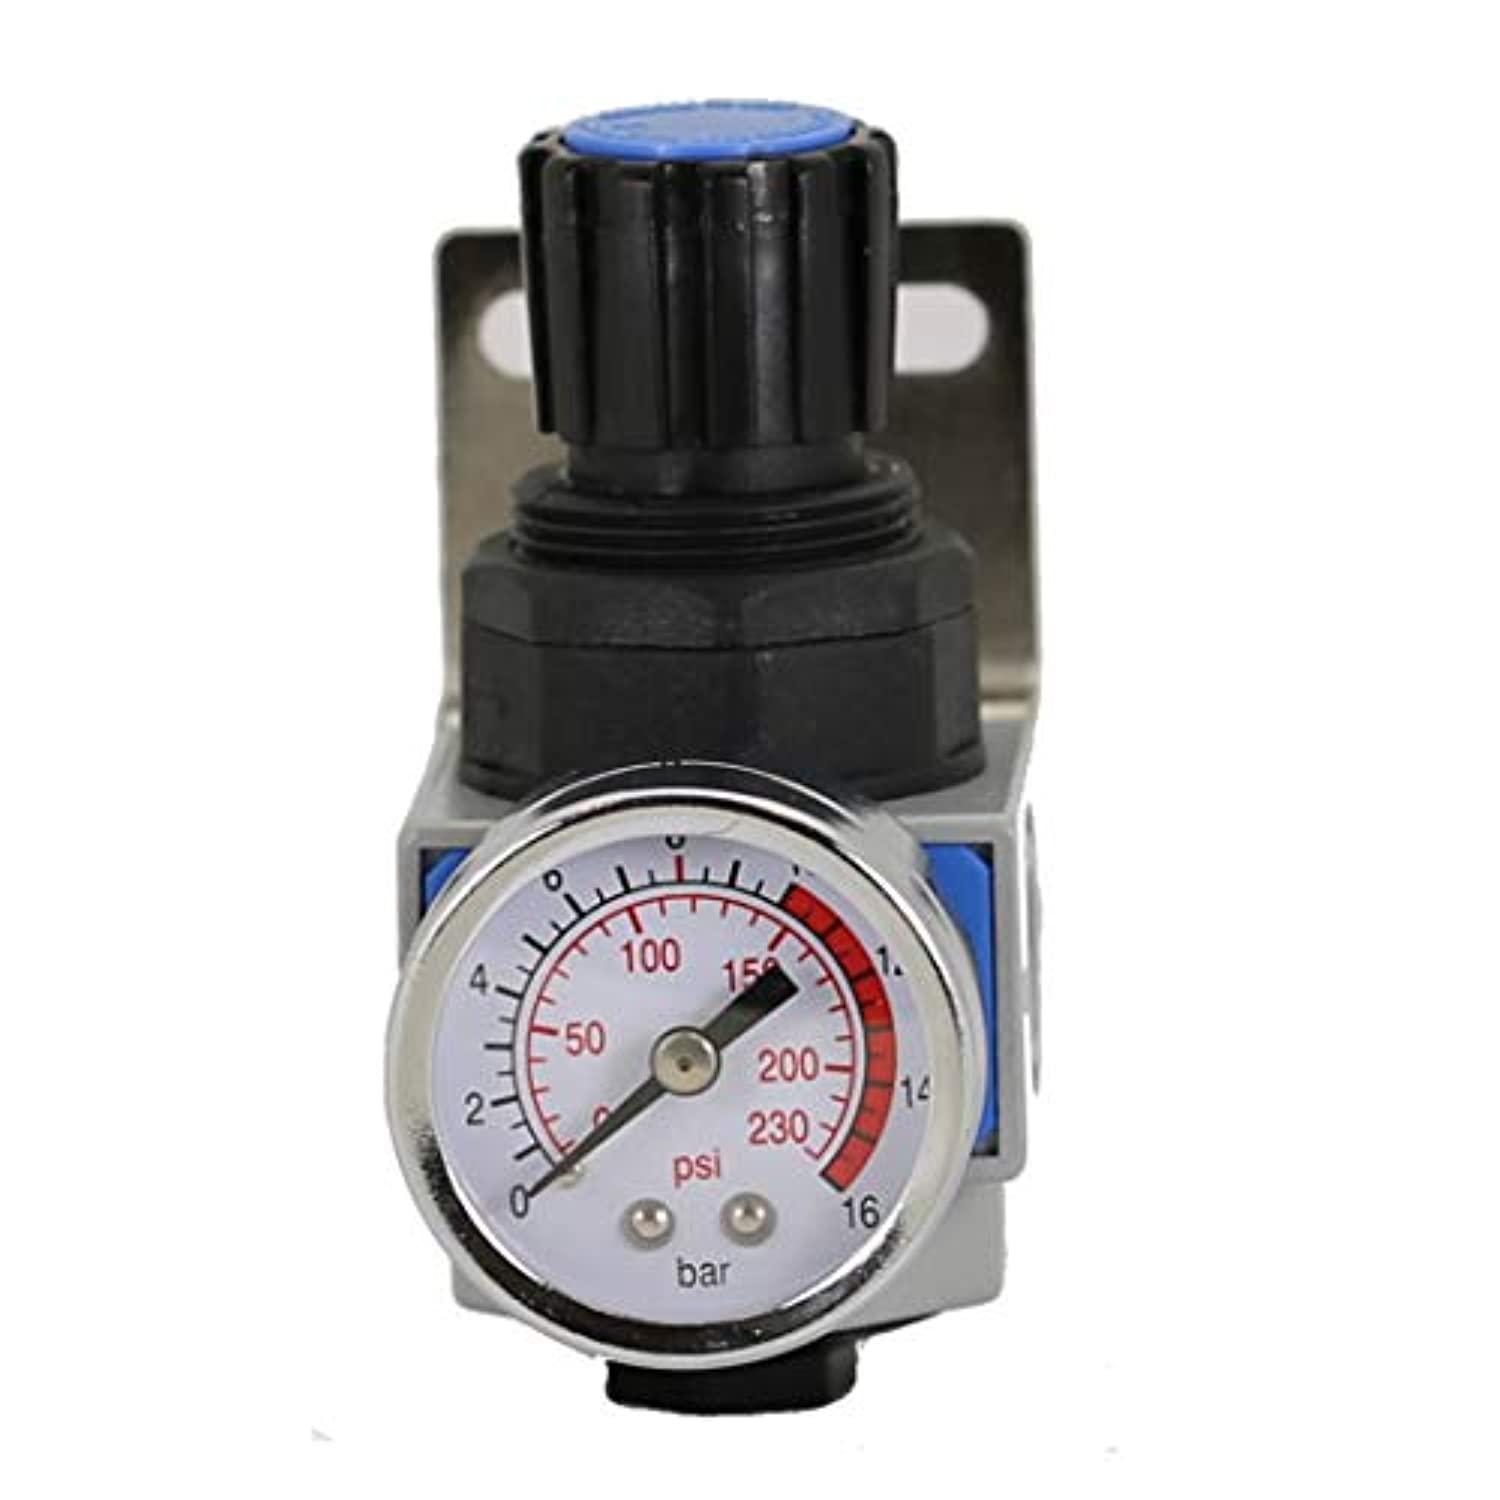 uffy industrial pneumatic air regulator for tools operating 0 to 145 psi with wall mount bracket